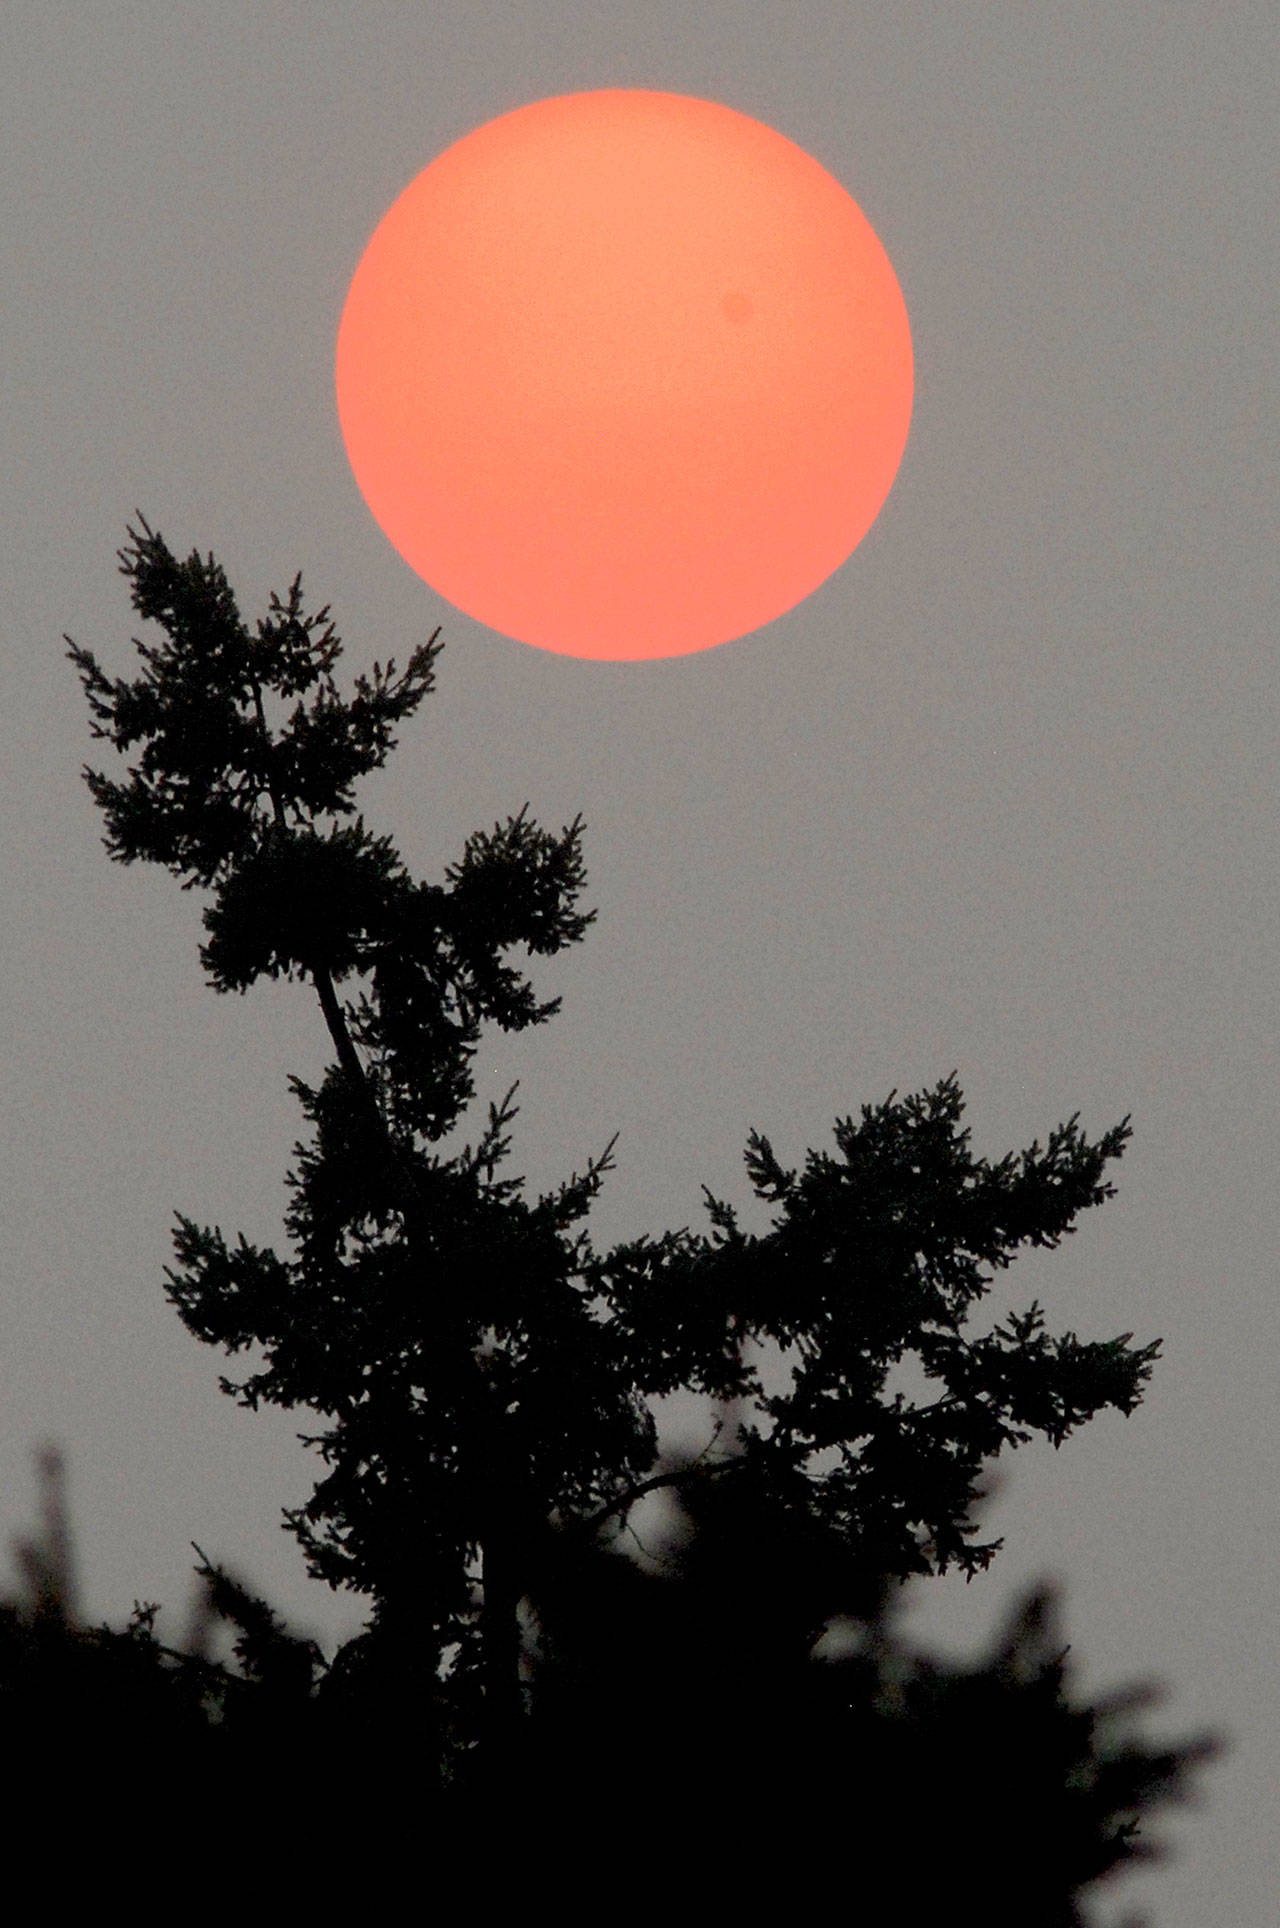 The sun sets Monday through a layer of smoke from wildfires in British Columbia that drifted south to create a layer of haze over the Olympic Peninsula. (Keith Thorpe/Peninsula Daily News)